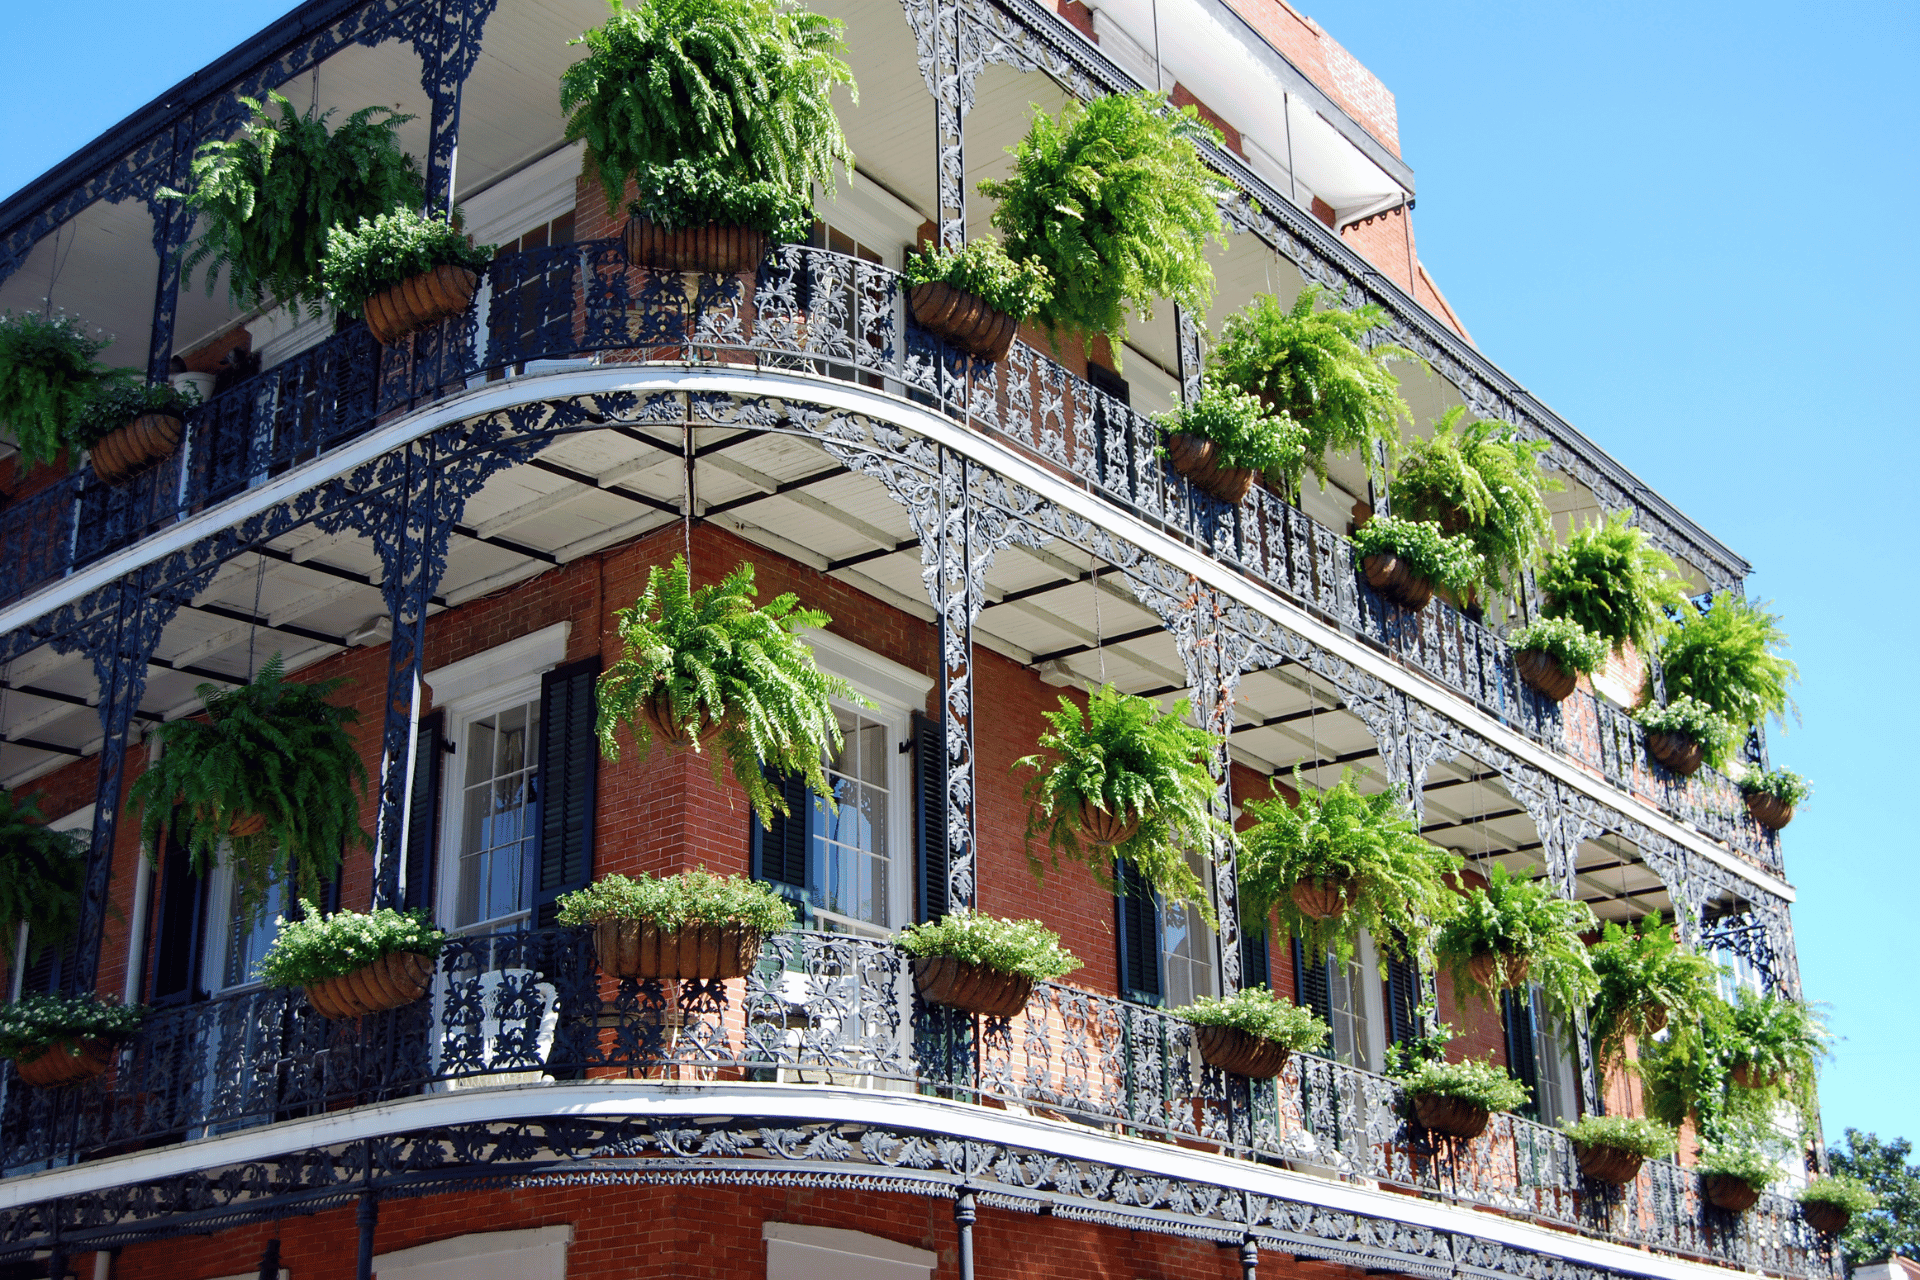 Explore the Vibrant City of New Orleans